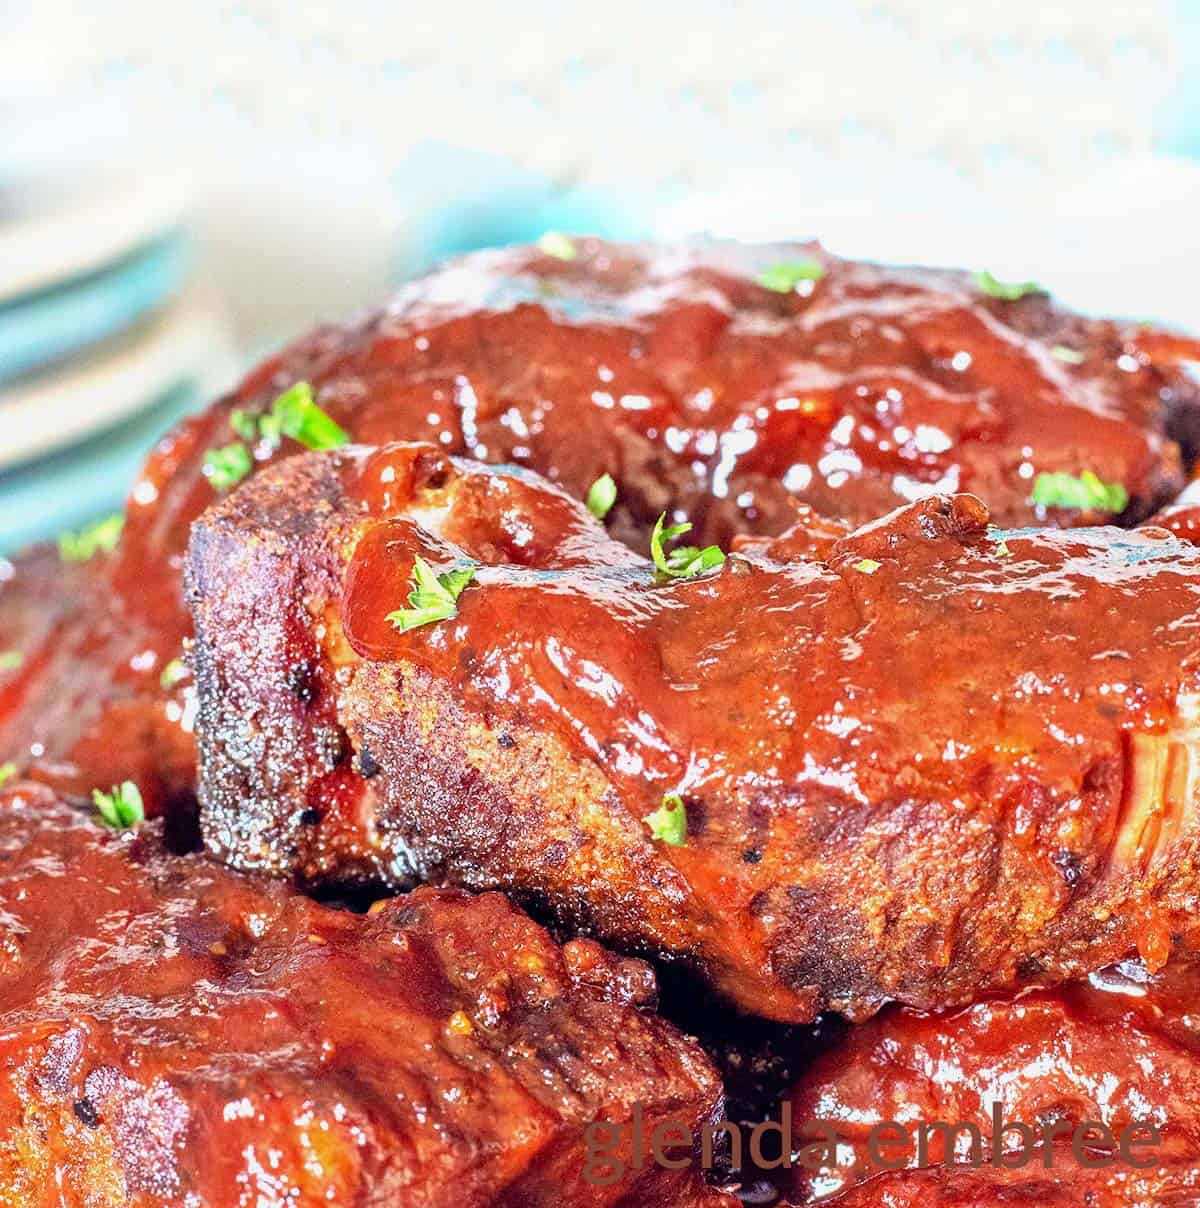 Country Style Ribs - Slow Cooker Country Ribs on a platter.